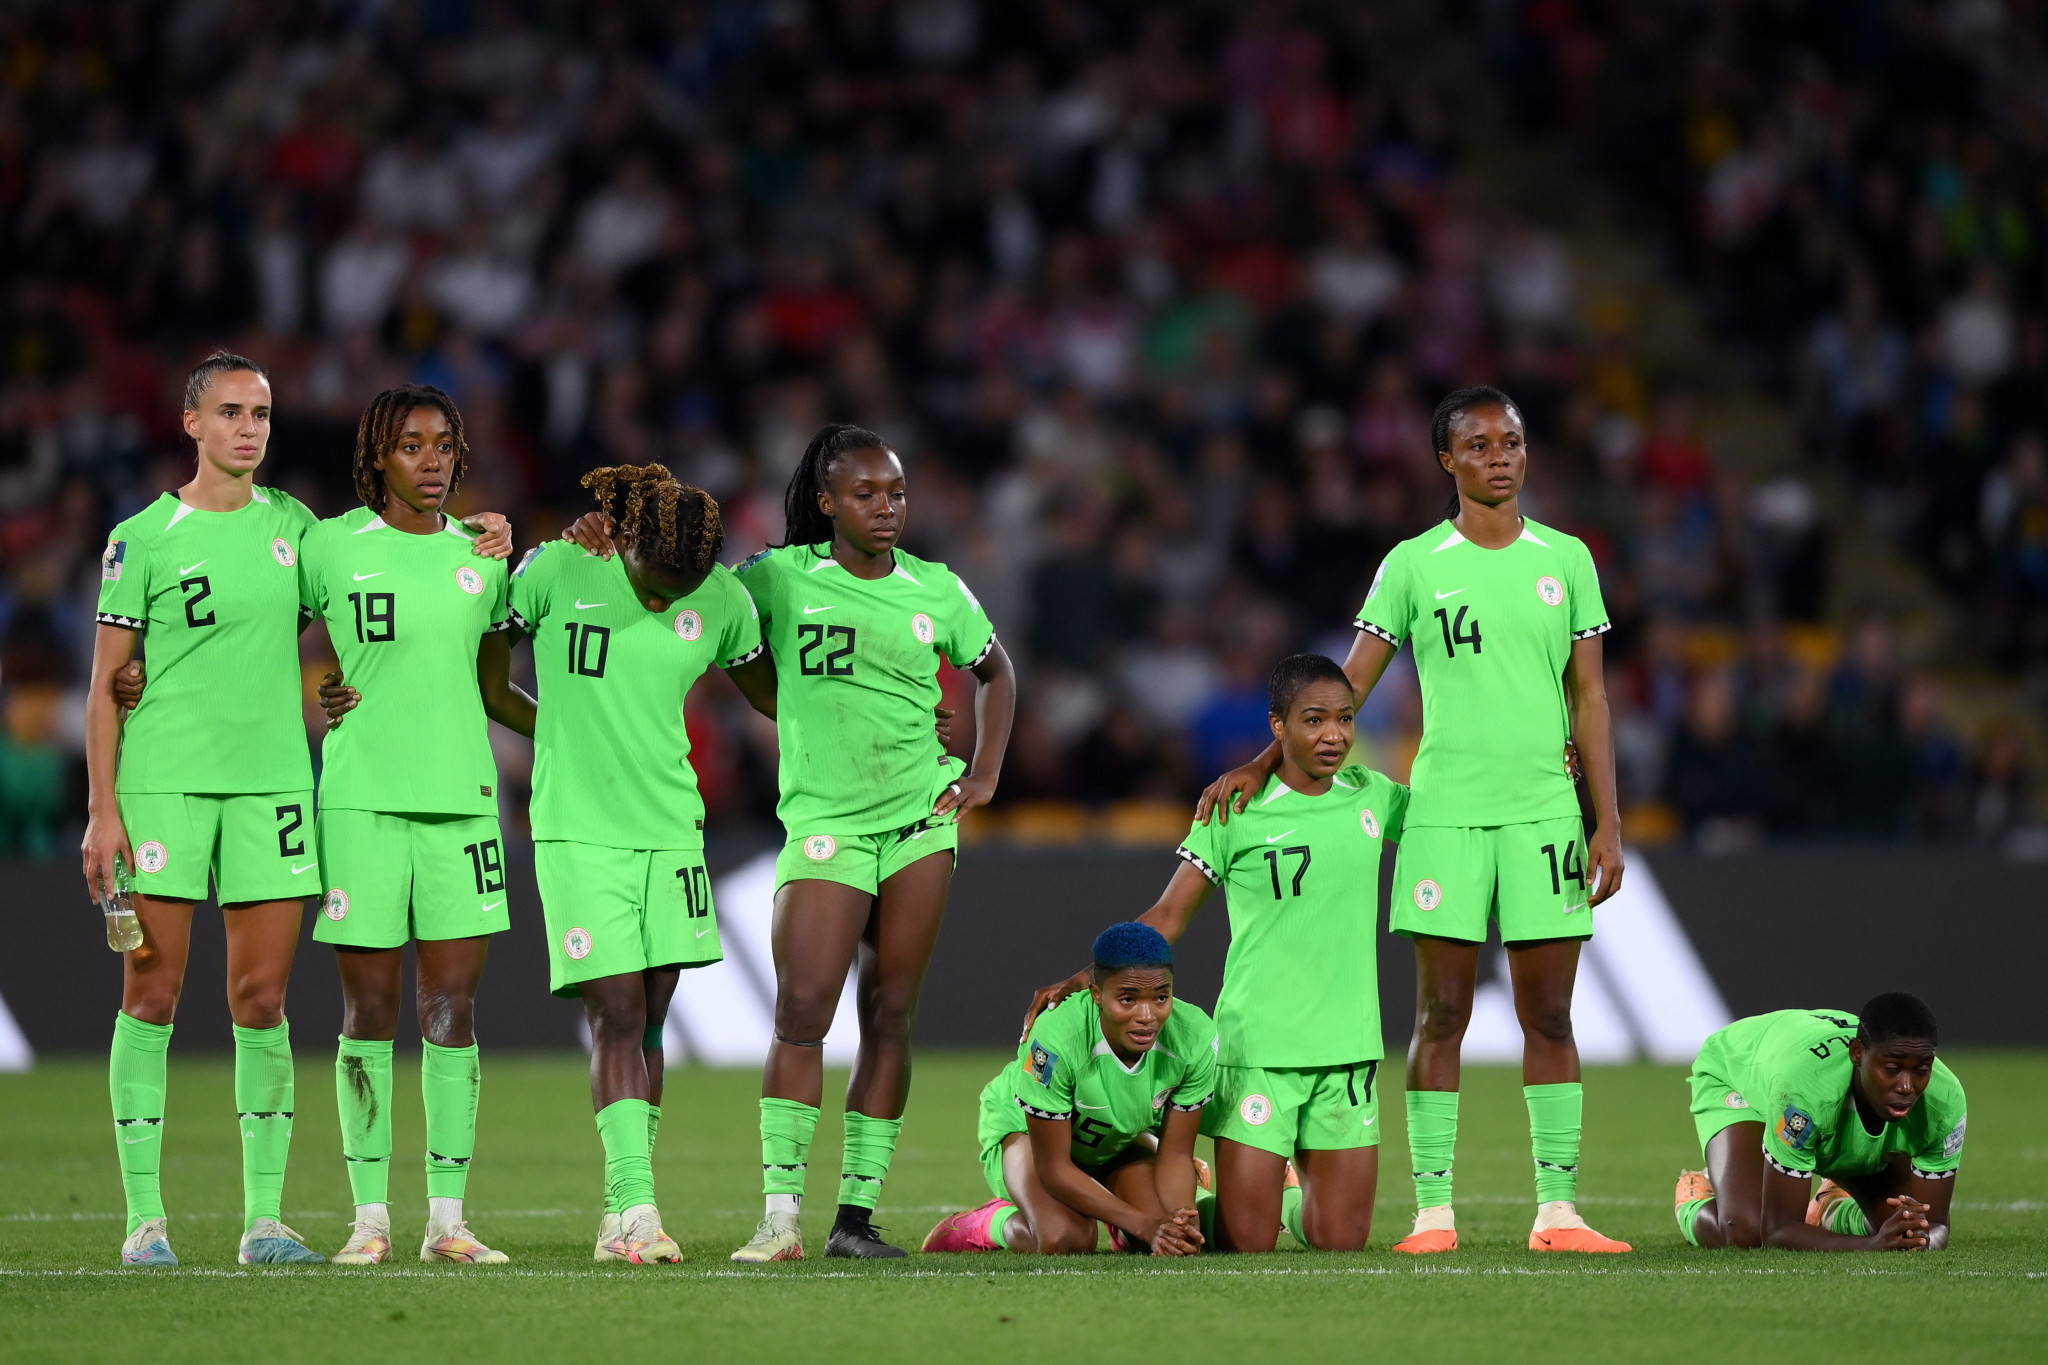 In contrast, Nigeria's players reflect on what might have been after coming close to becoming the first African nation to win a knockout match at the Women's World Cup ©Getty Images